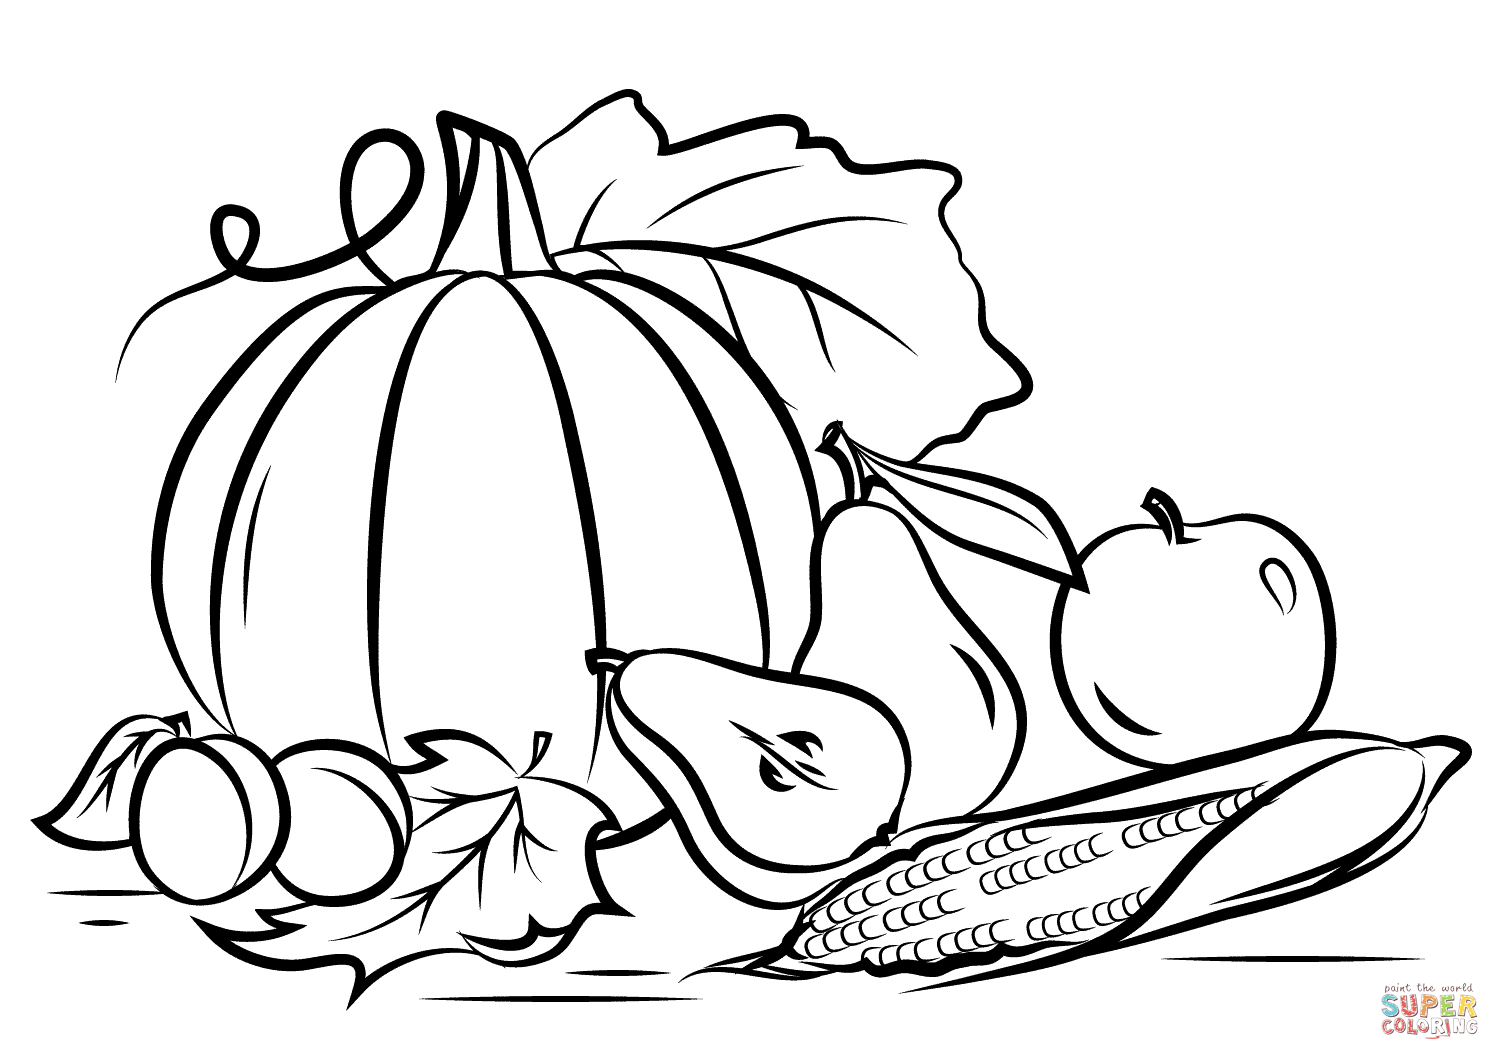 Autumn Harvest Coloring Page | Free Printable Coloring Pages - Free Printable Coloring Pages Fall Season